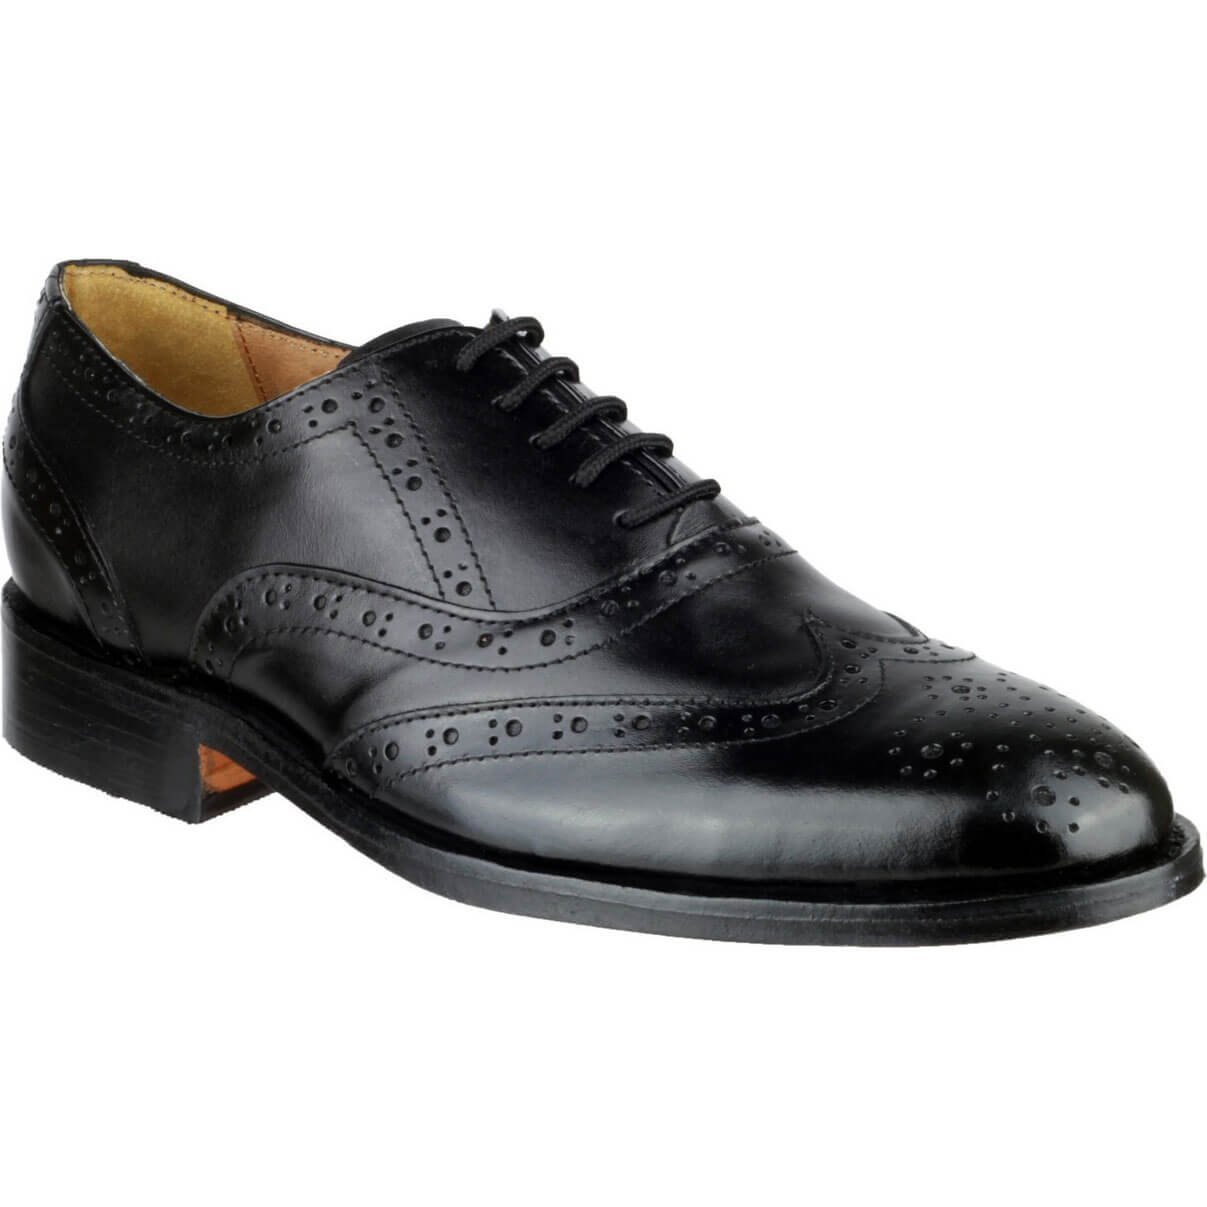 Image of Amblers Ben Leather Soled Oxford Brogue Black Size 8.5